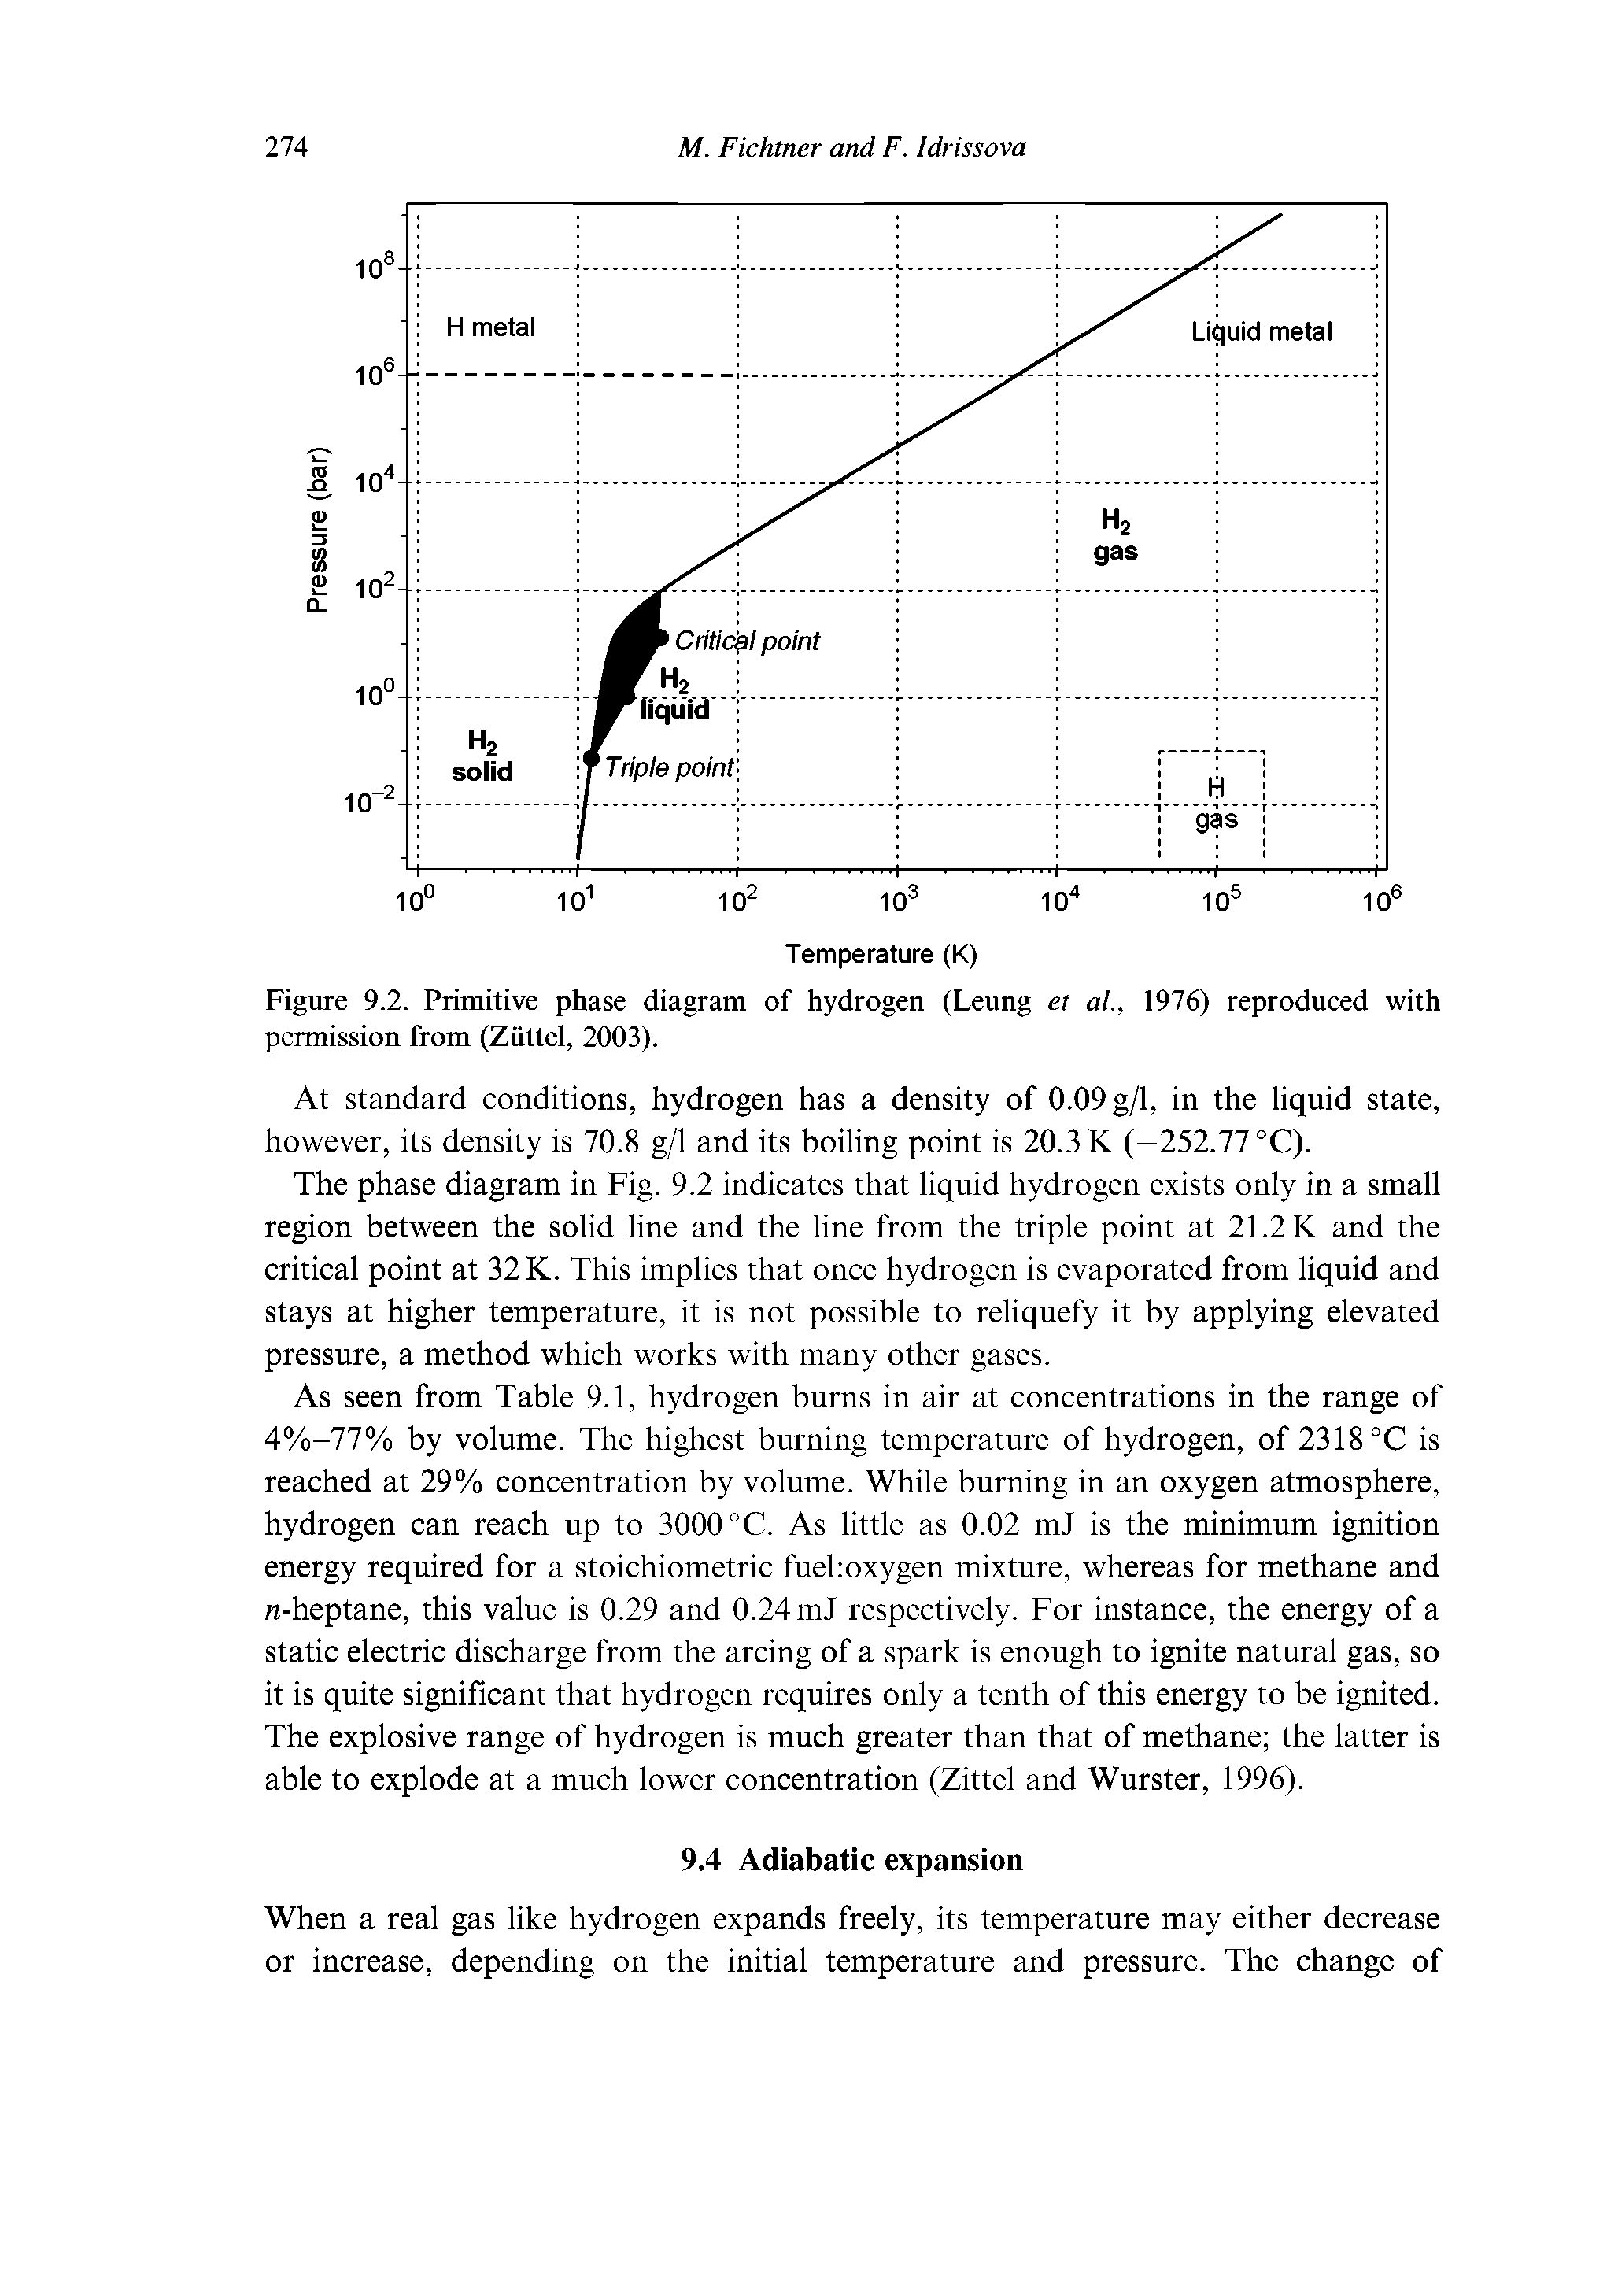 Figure 9.2. Primitive phase diagram of hydrogen (Leung et al., 1976) reproduced with permission from (Ziittel, 2003).